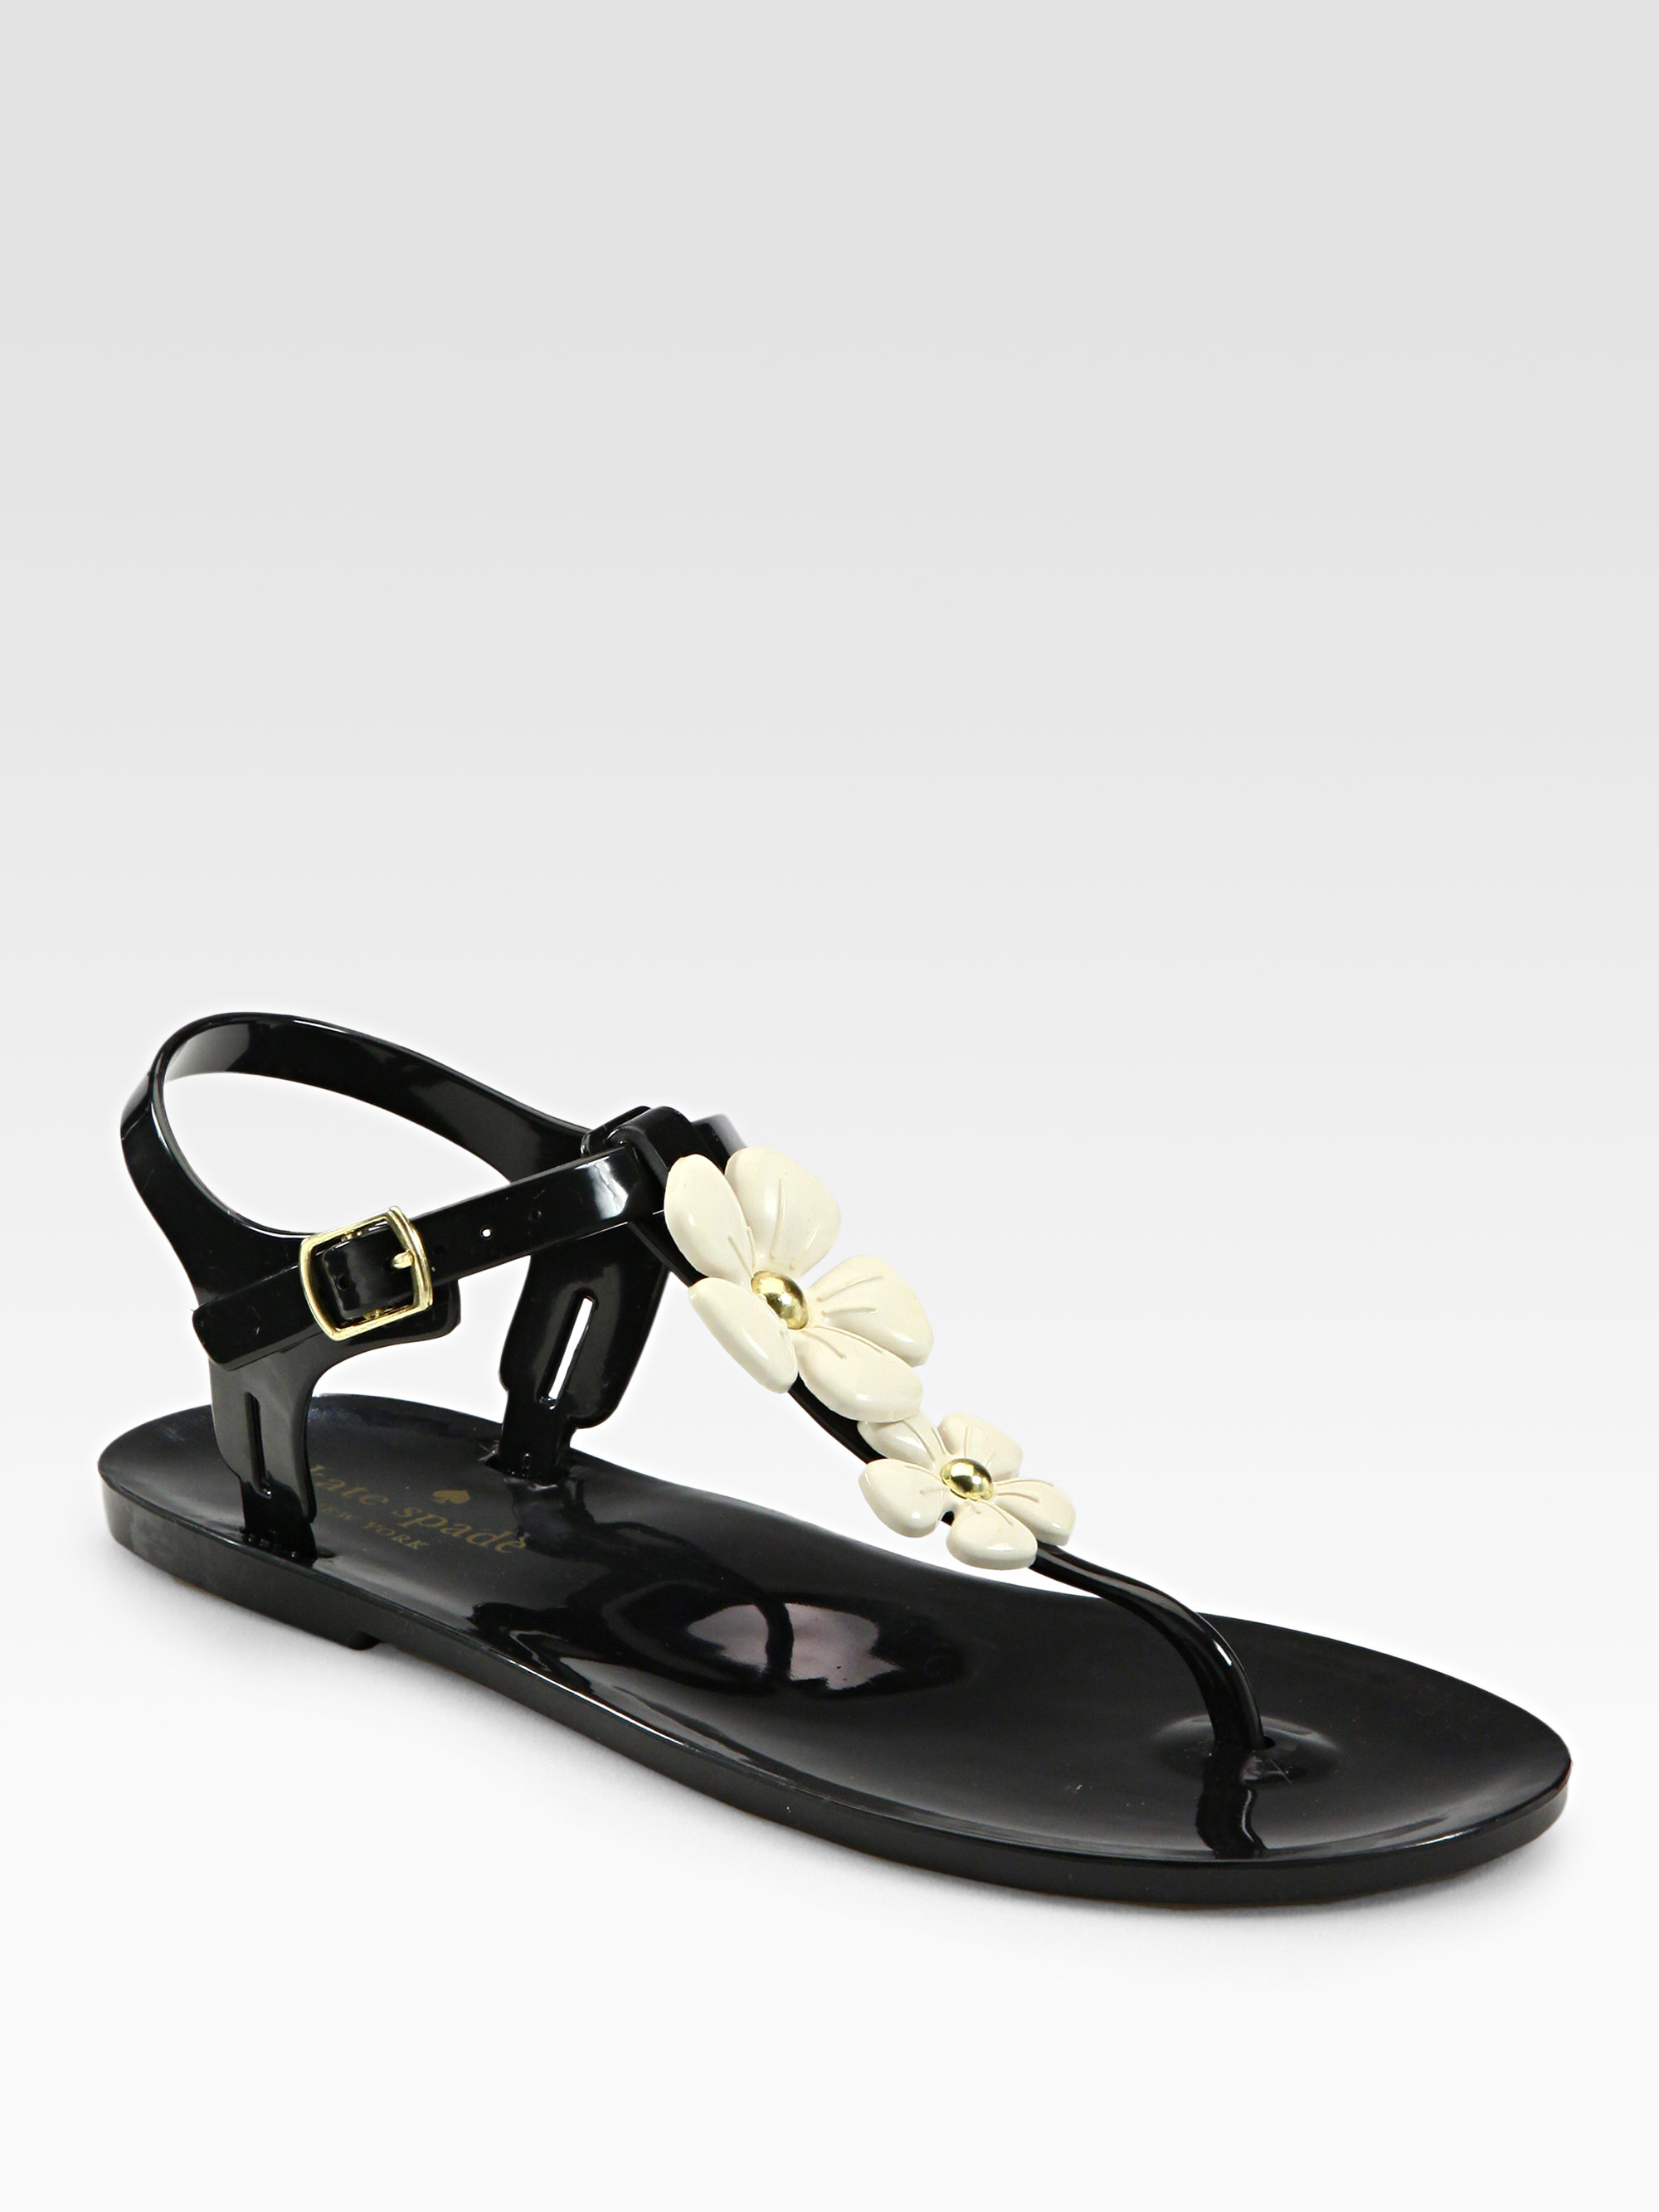 Lyst - Kate Spade New York Findley Jelly Flower Thong Sandals in Black